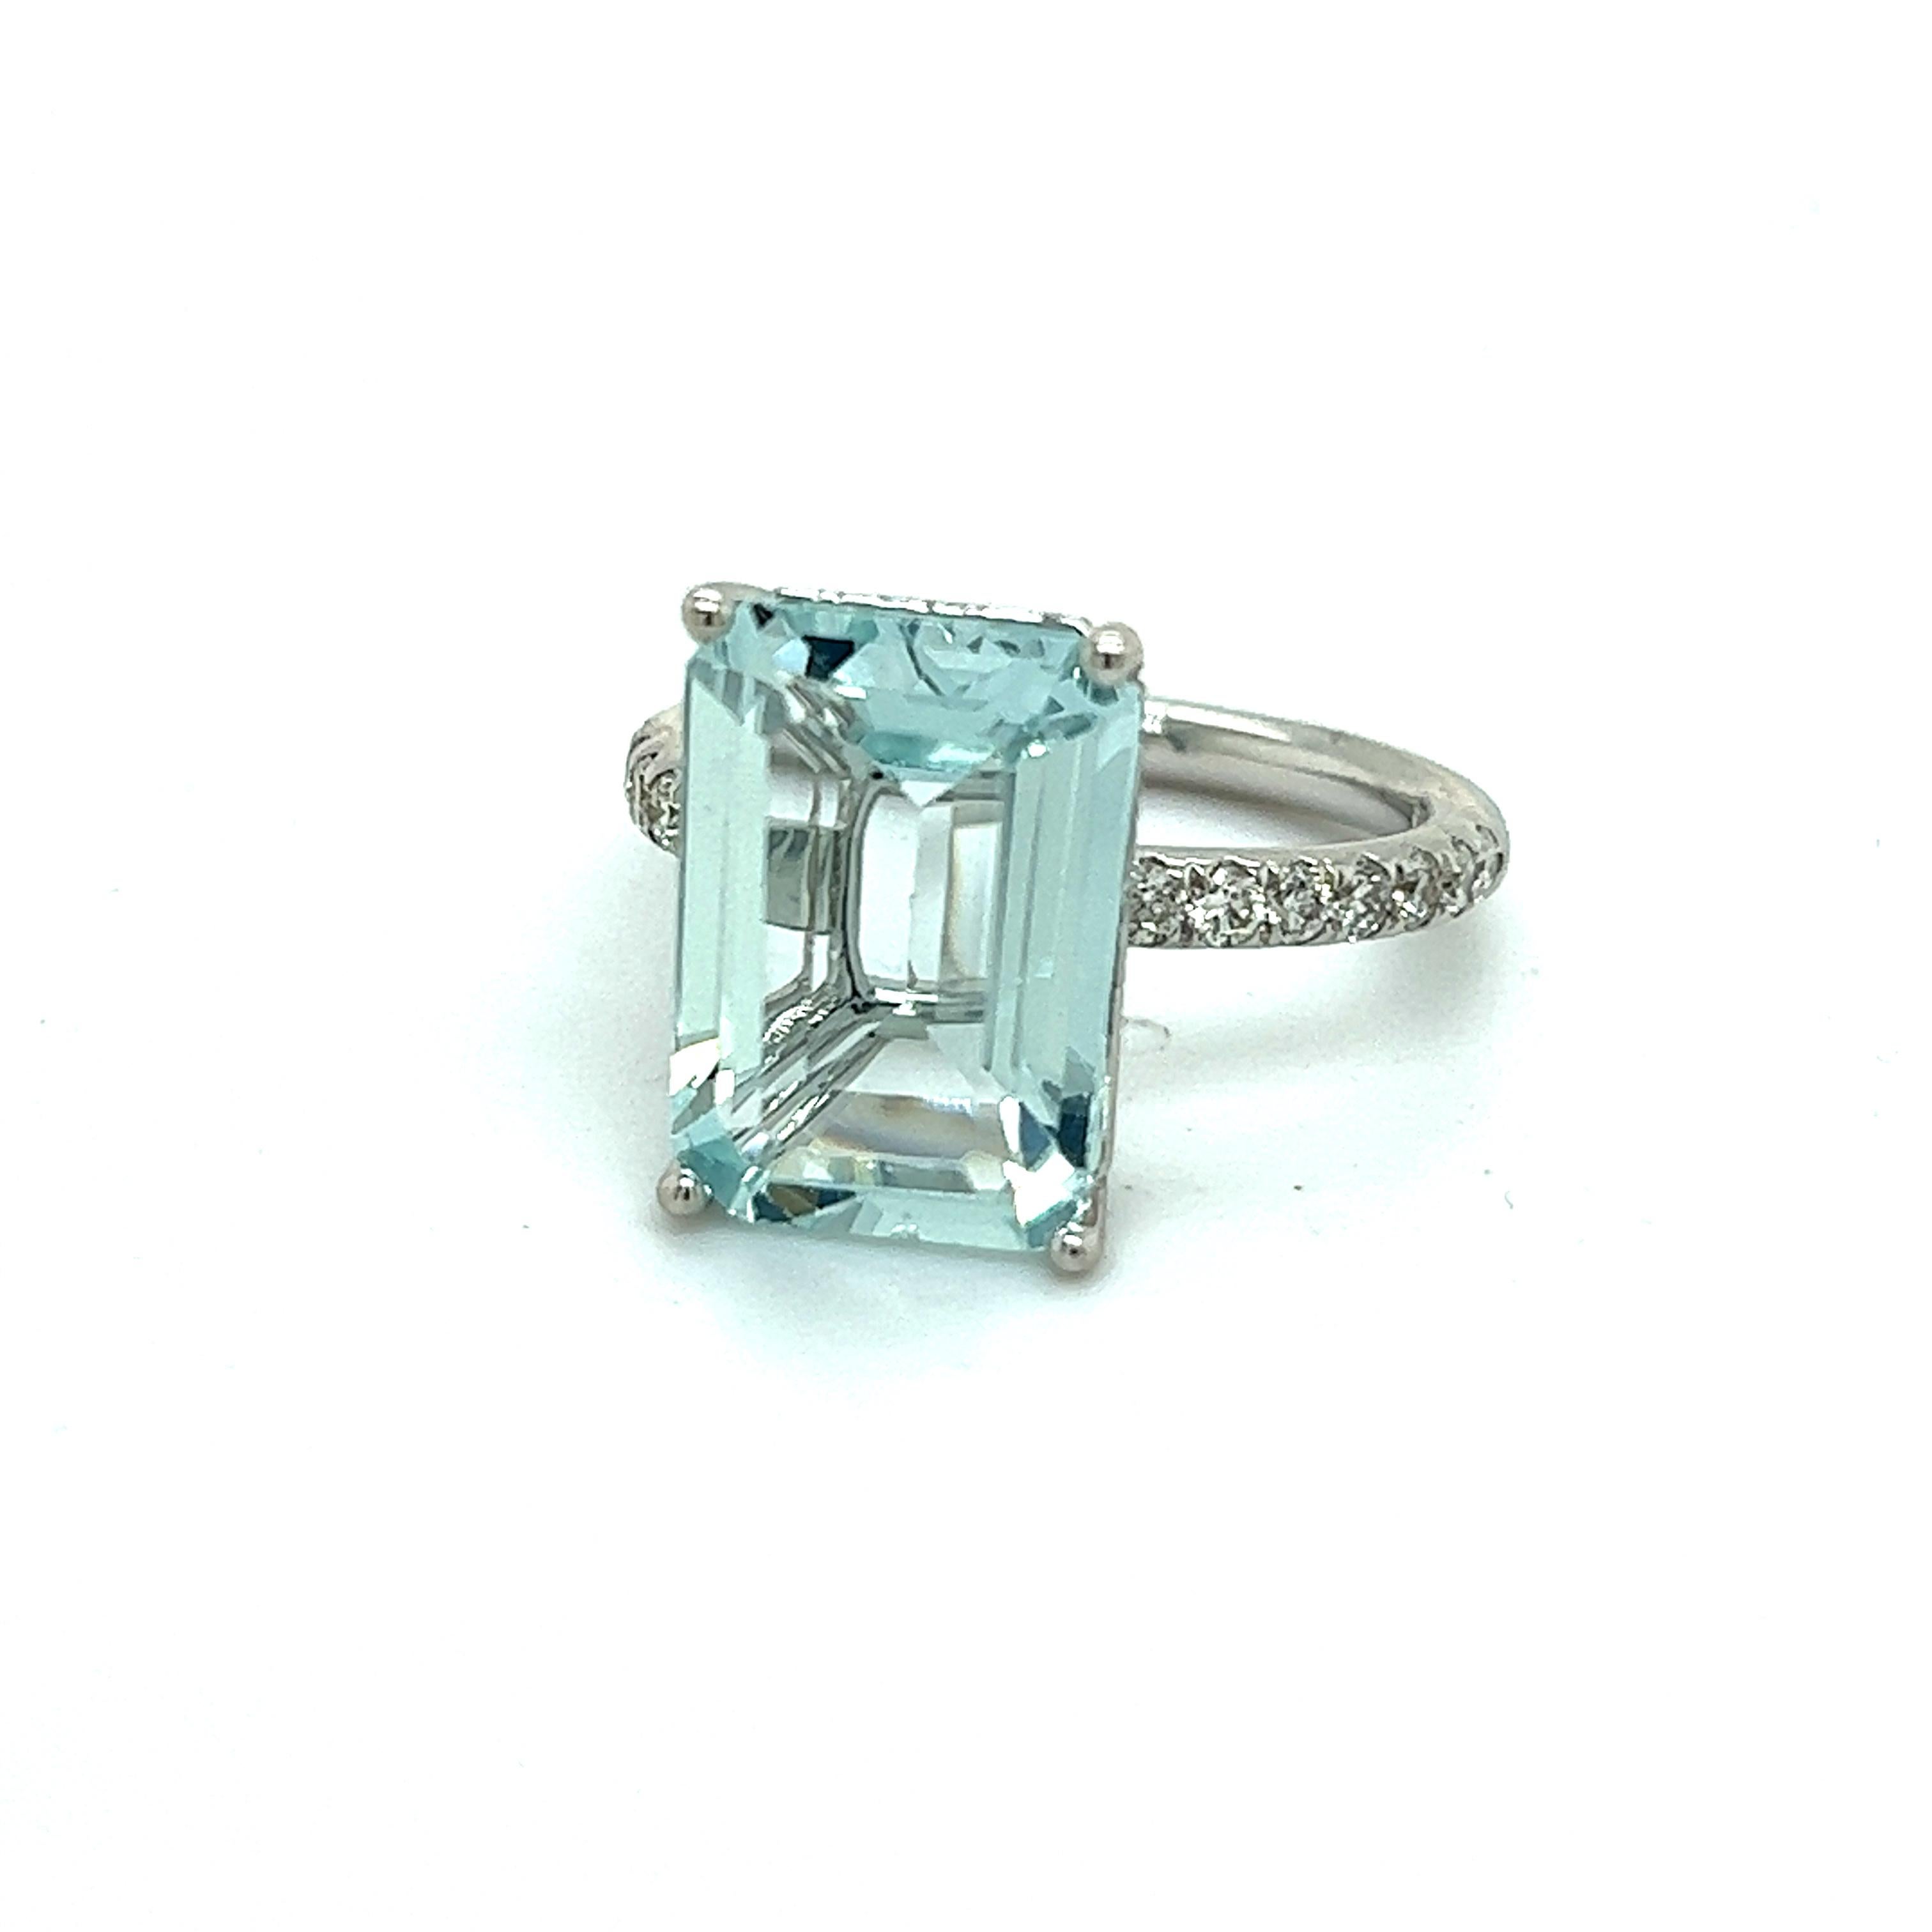 Natural Aquamarine Diamond Ring Size 6.5 14k W Gold 5.78 TCW Certified $4,795 217097

This is a Unique Custom Made Glamorous Piece of Jewelry!

Nothing says, “I Love you” more than Diamonds and Pearls!

This Aquamarine ring has been Certified,